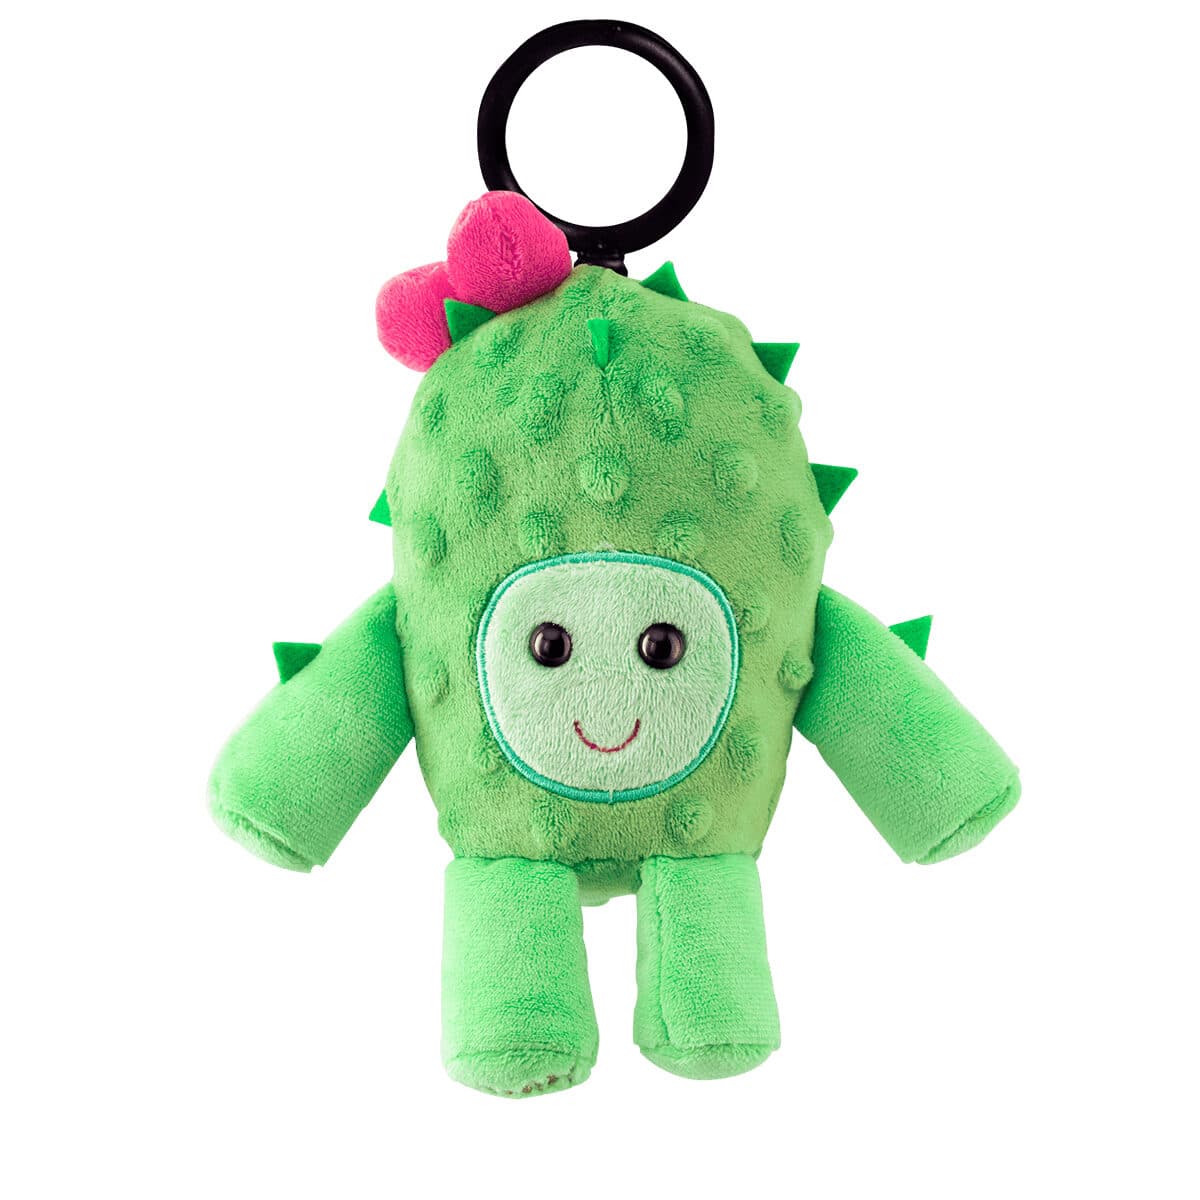 Prickly the Cactus Scentsy Buddy Clip in Prickly Pear & Agave Fragrance